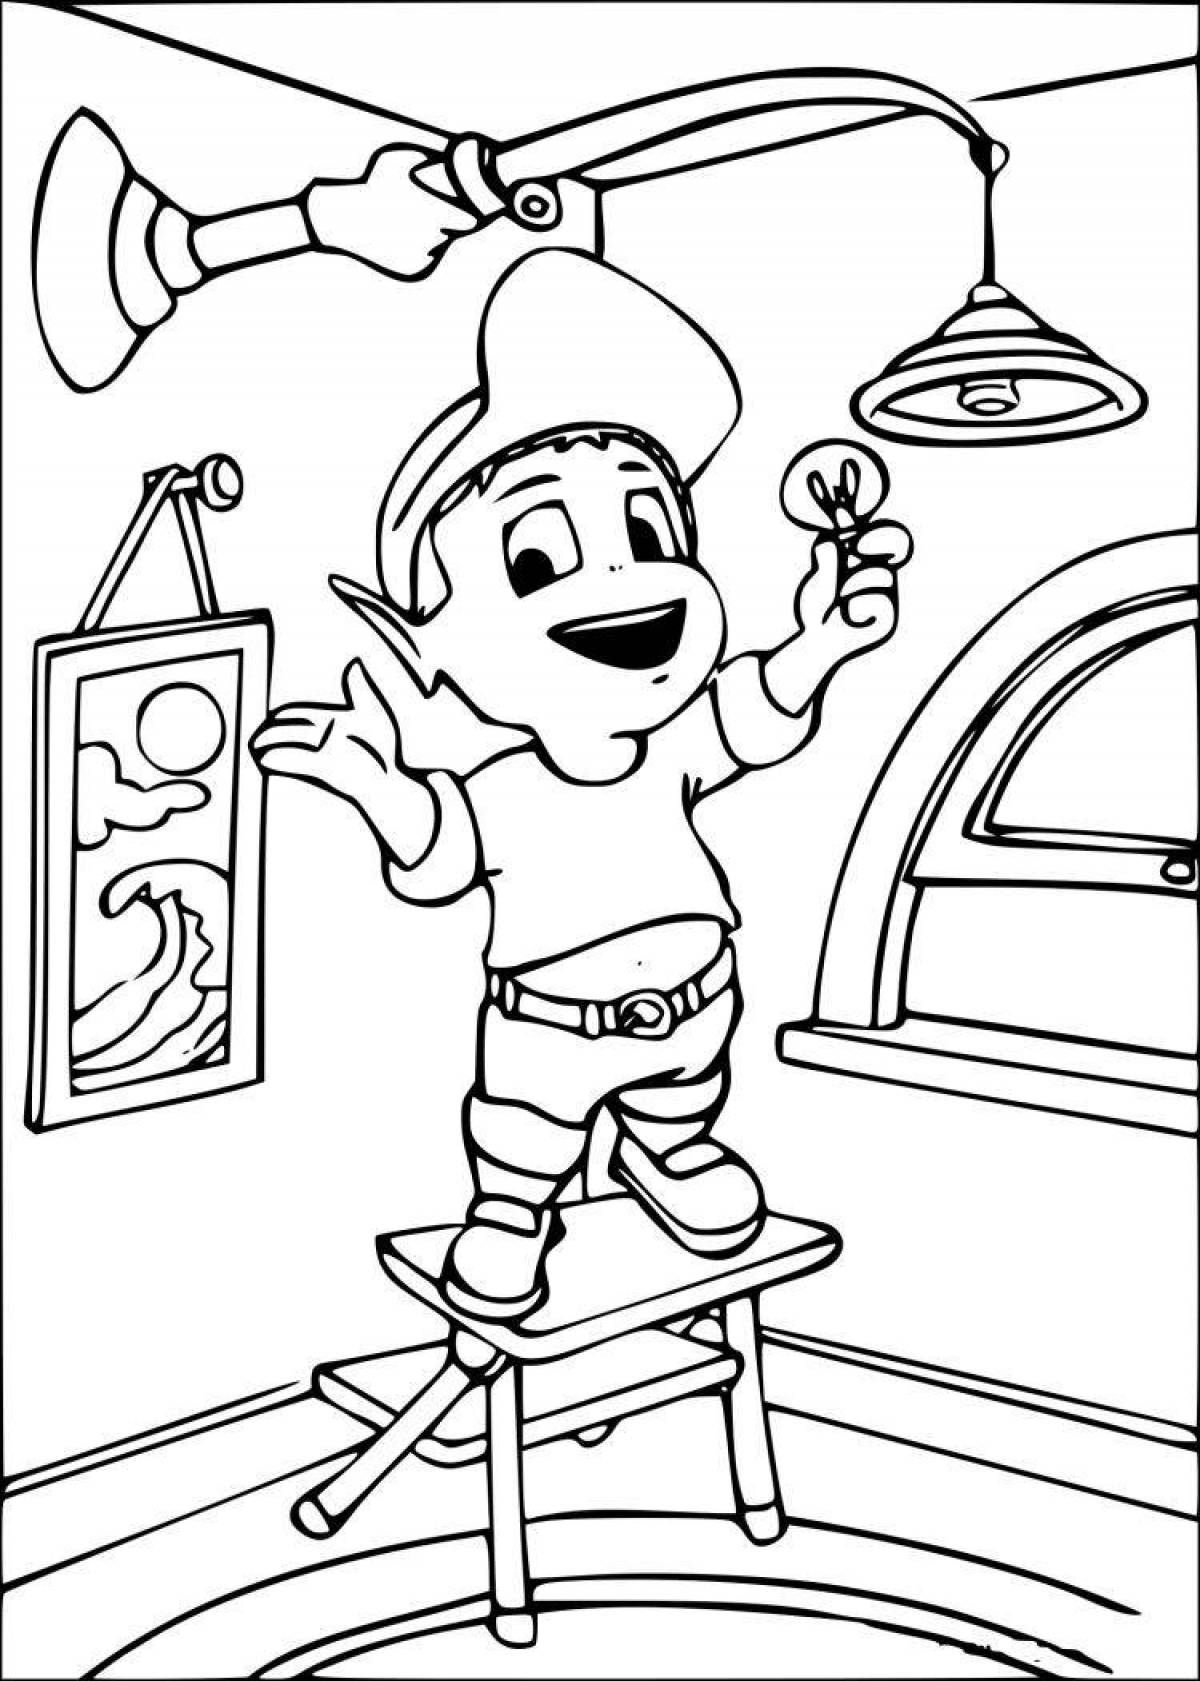 Electrical safety coloring book